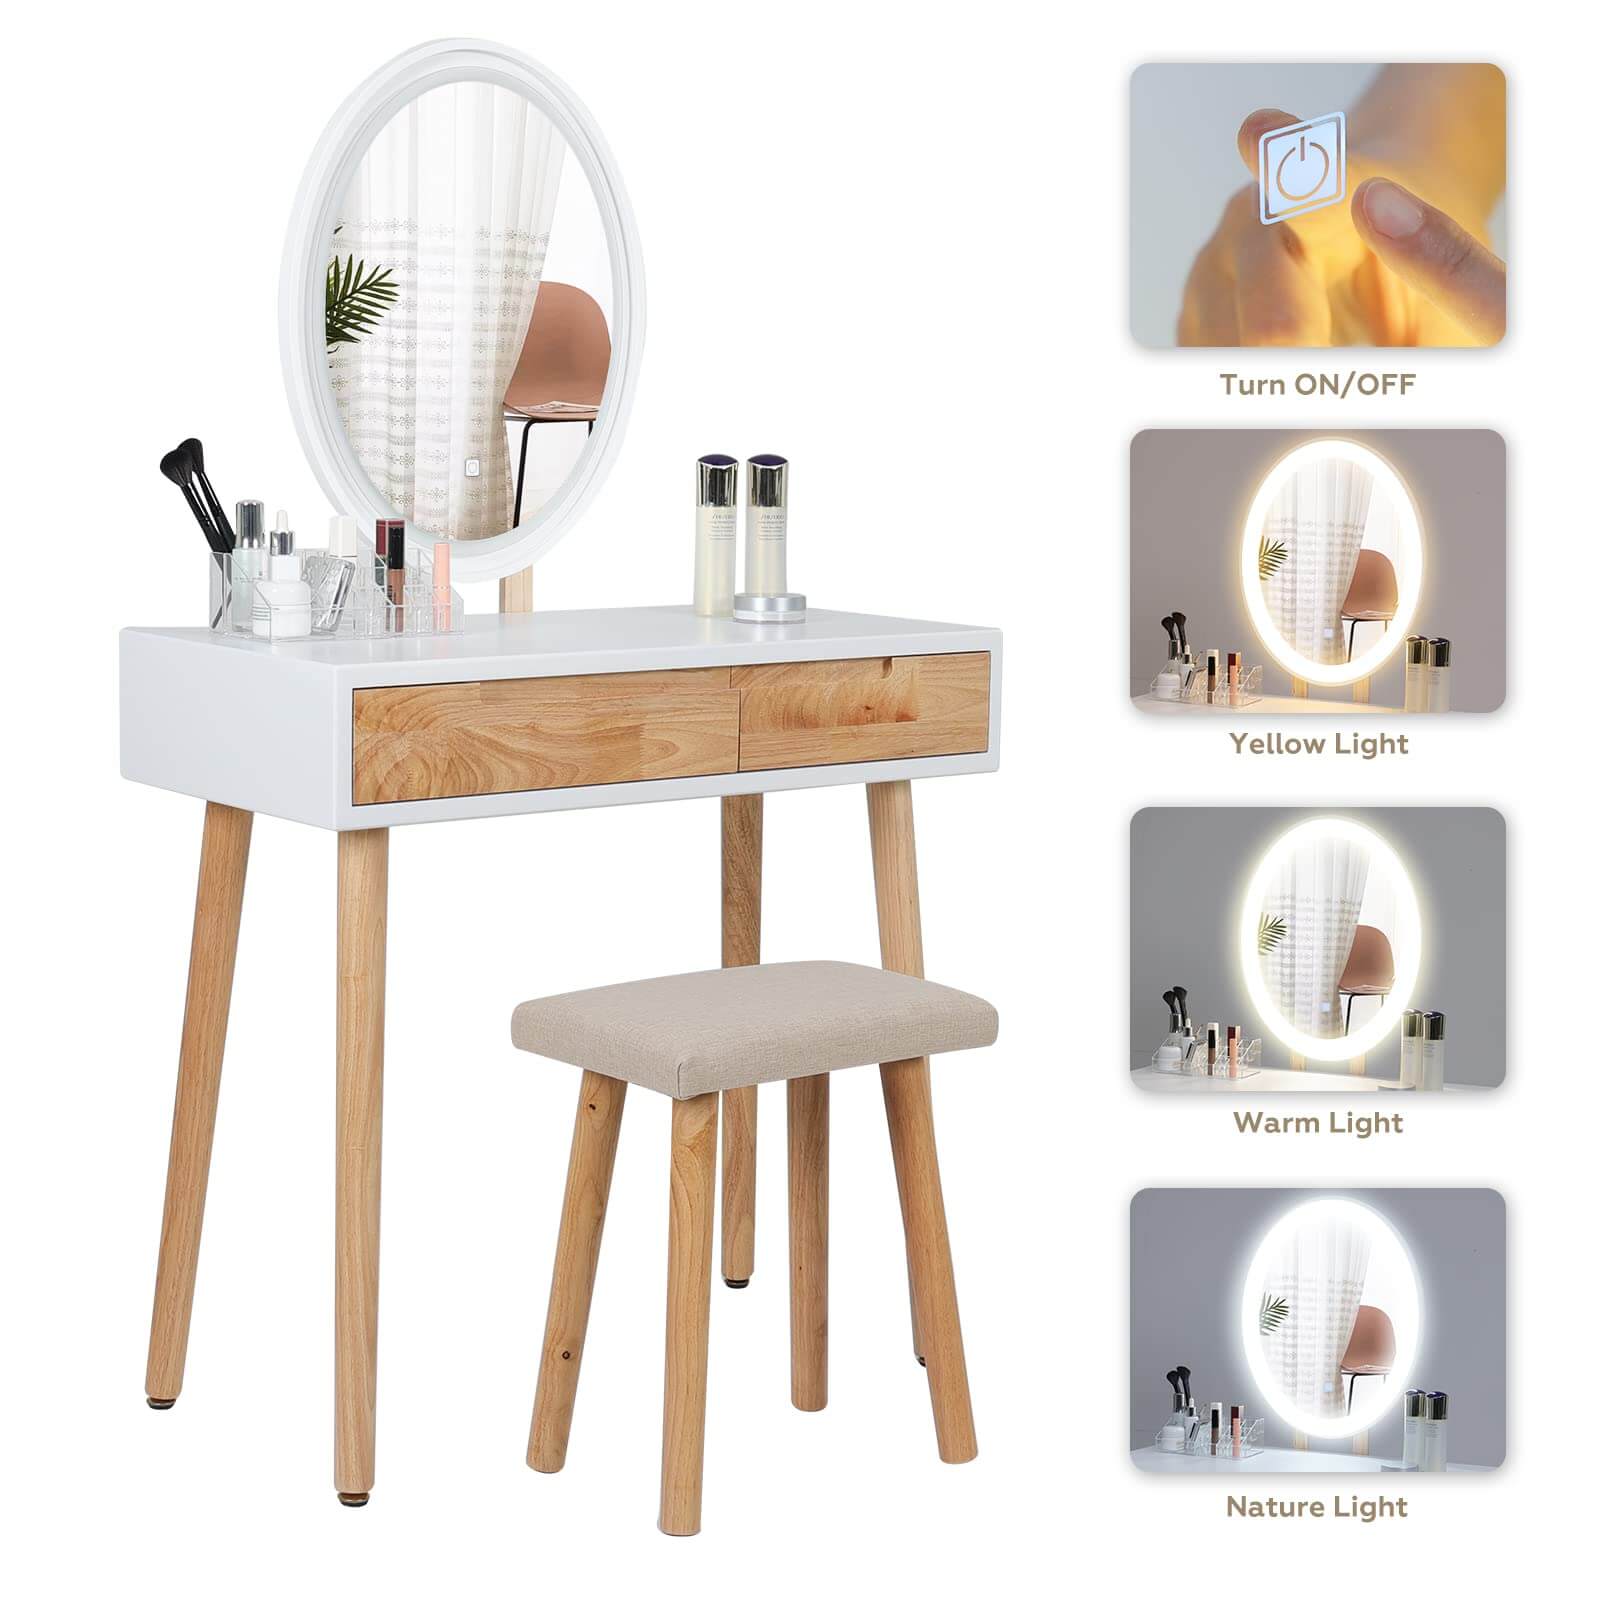 LED light display of Elecwish Vanity Makeup Table Set with Adjustable LED Oval Mirror IF11213